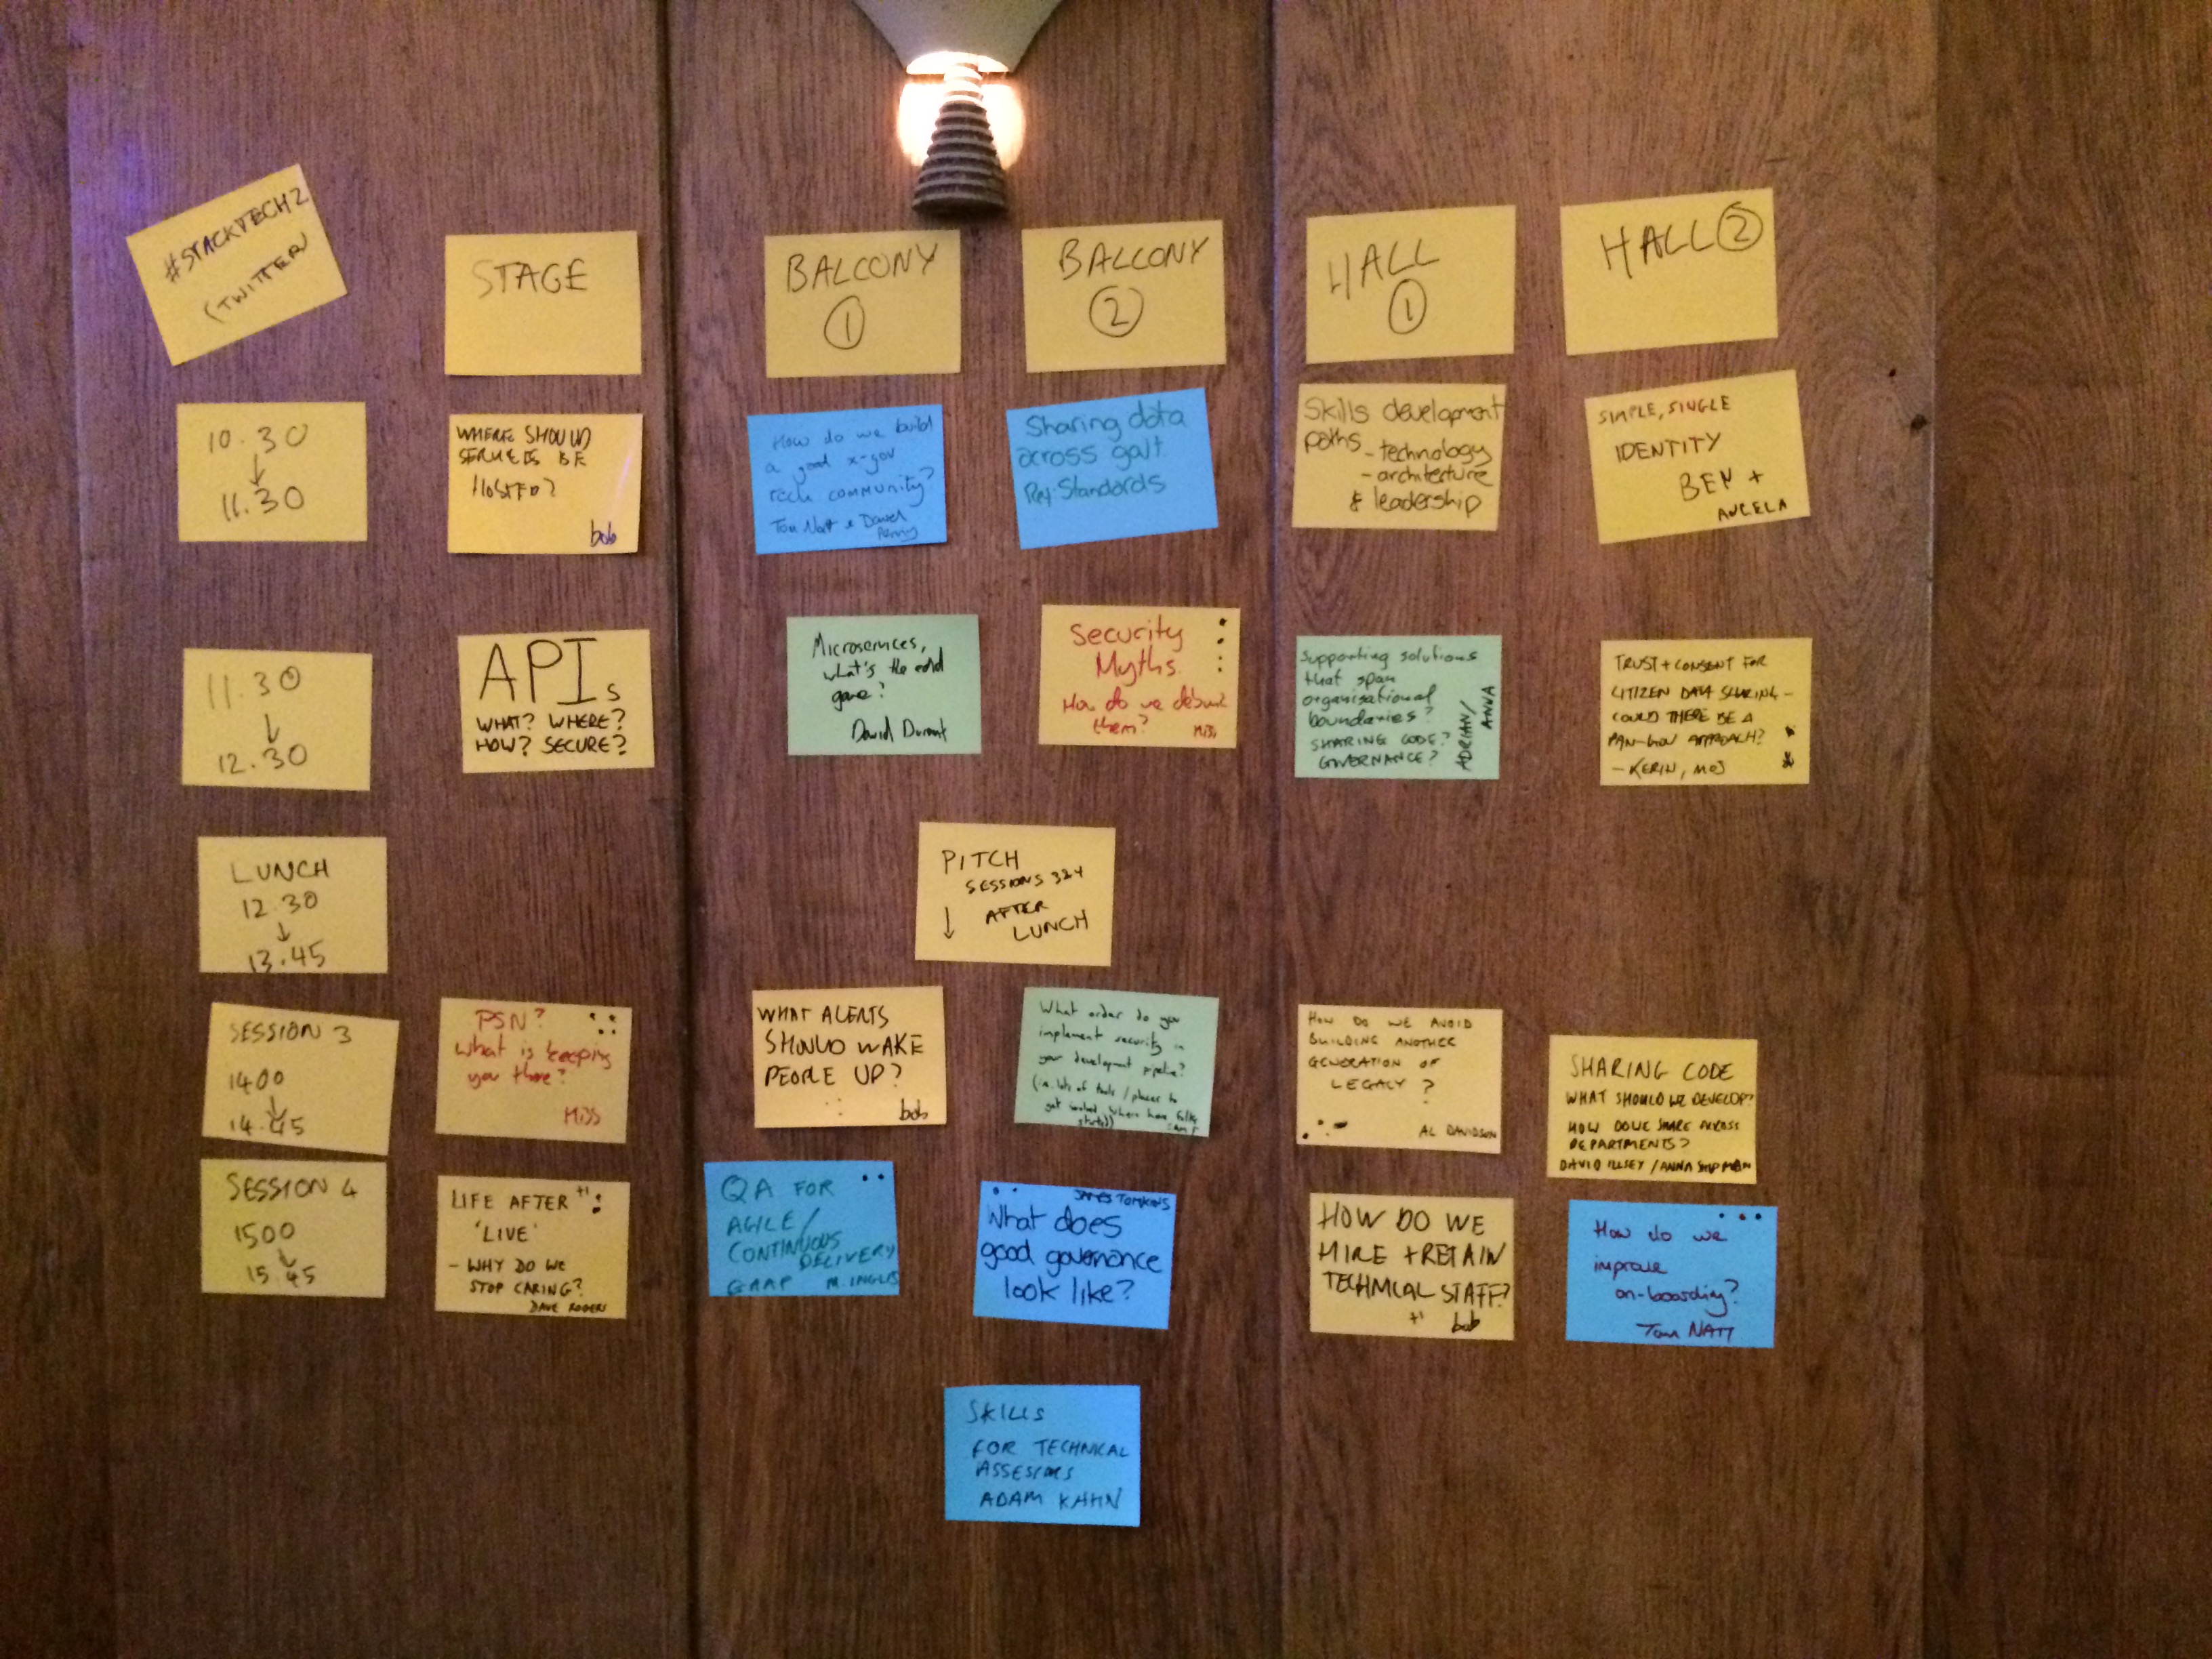 StackTech2 post-it notes about the different sessionson a wall